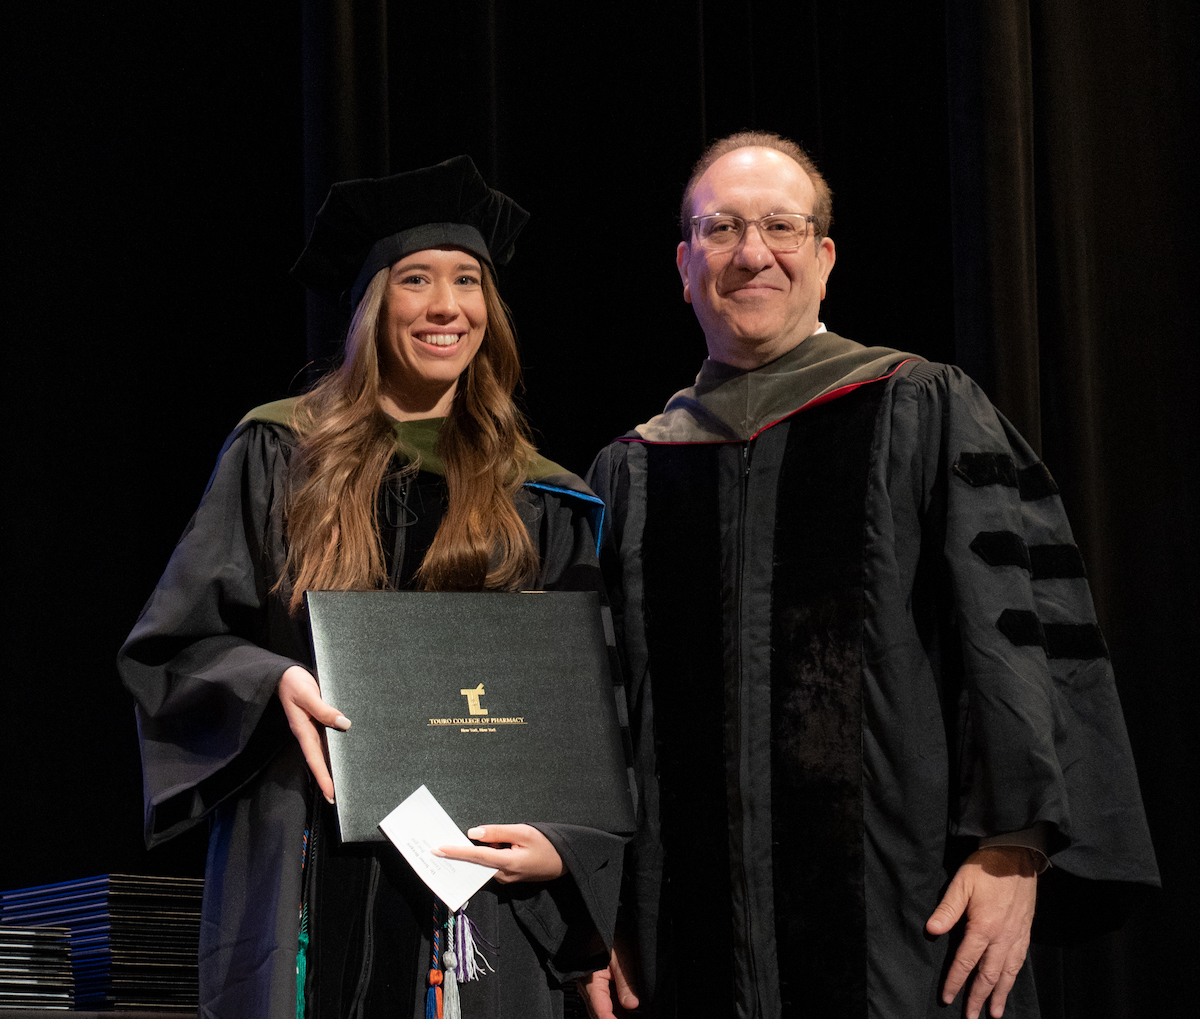 Irene Berger receiving her diploma from TCOP Dean Henry Cohen